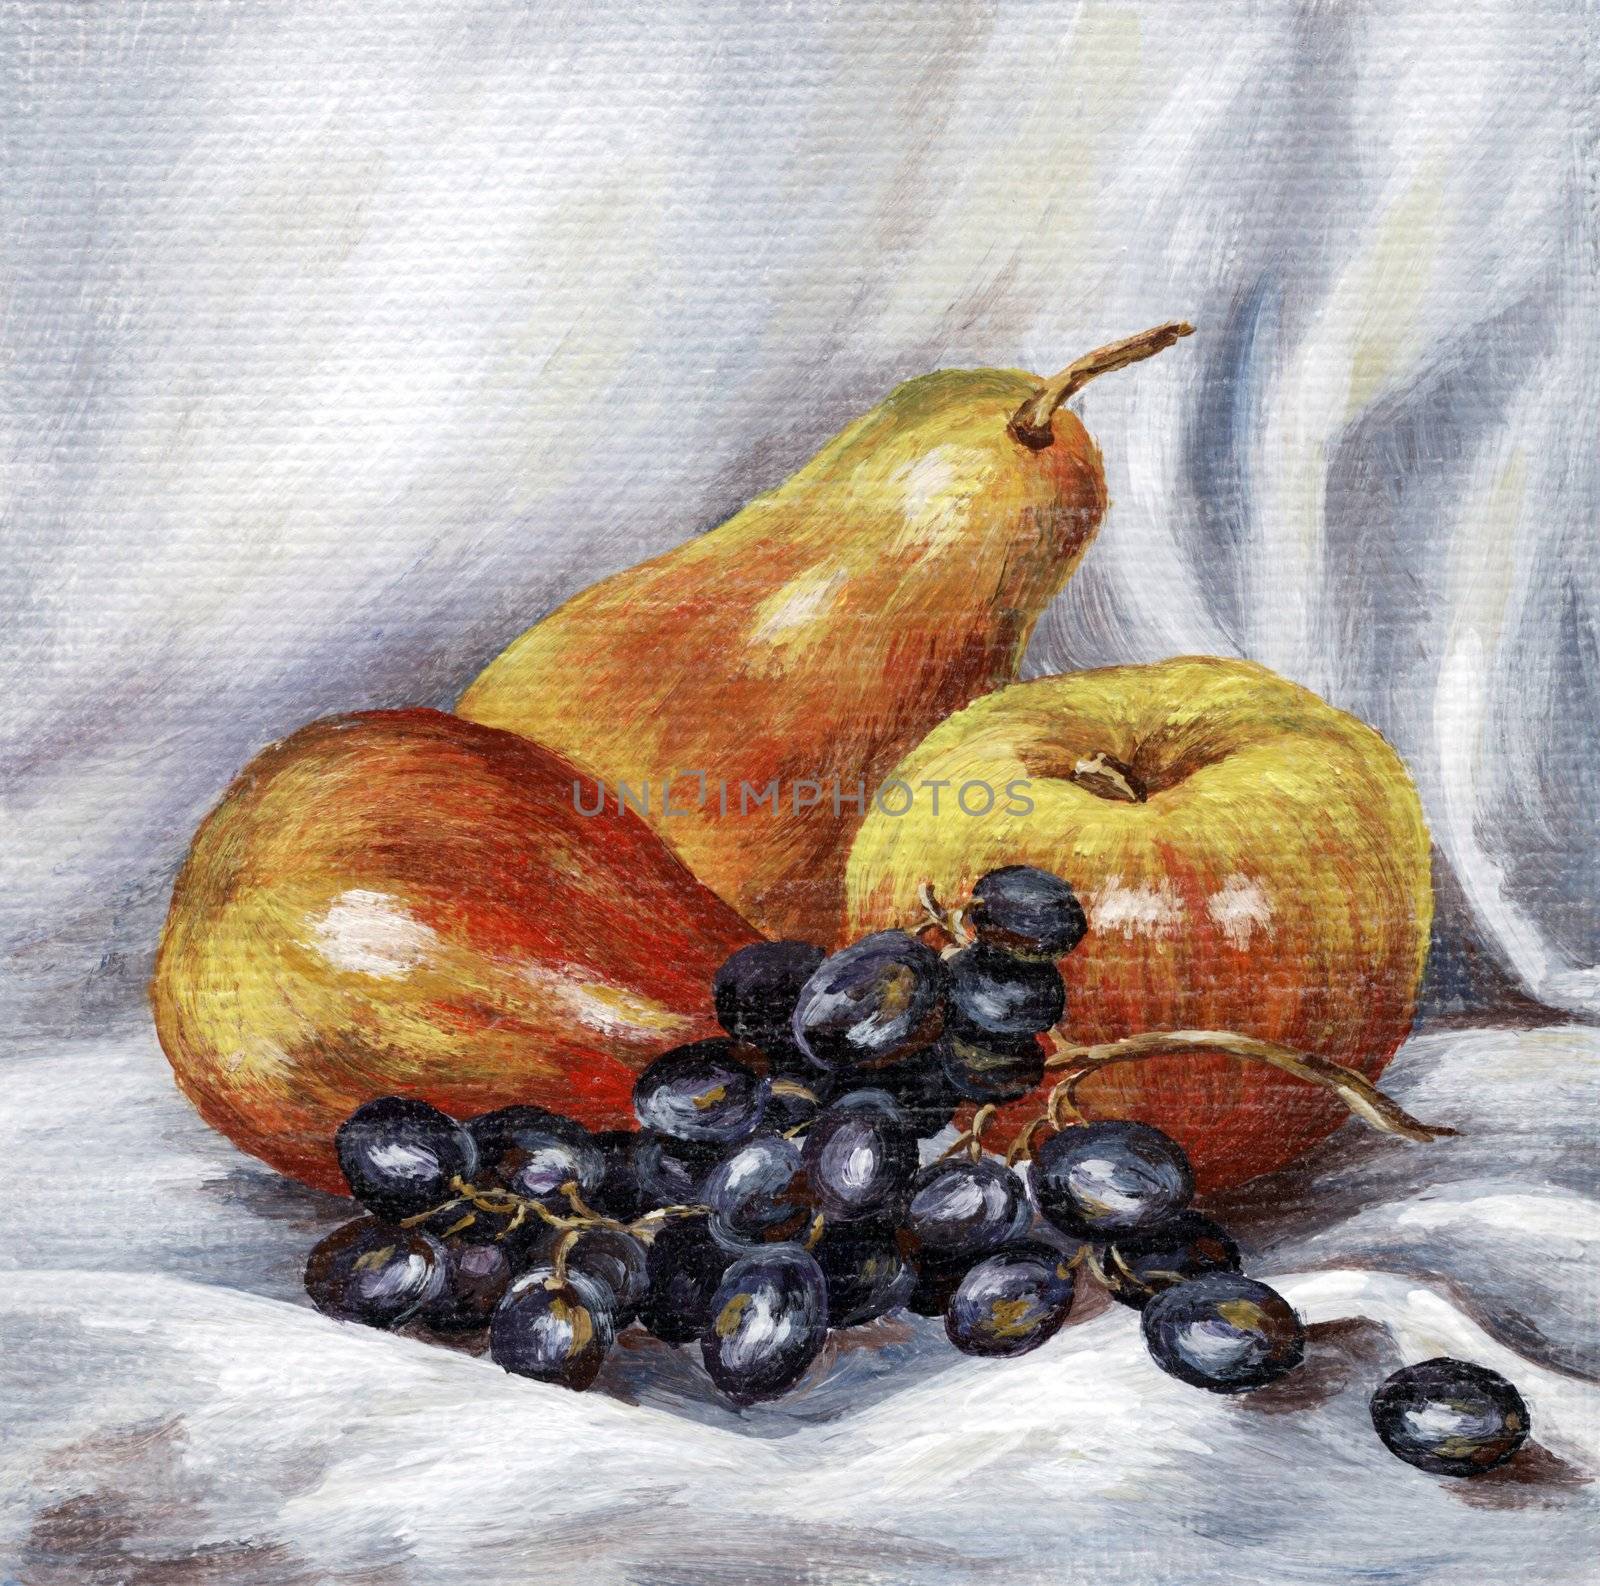 Apples, pears, grapes by alexcoolok